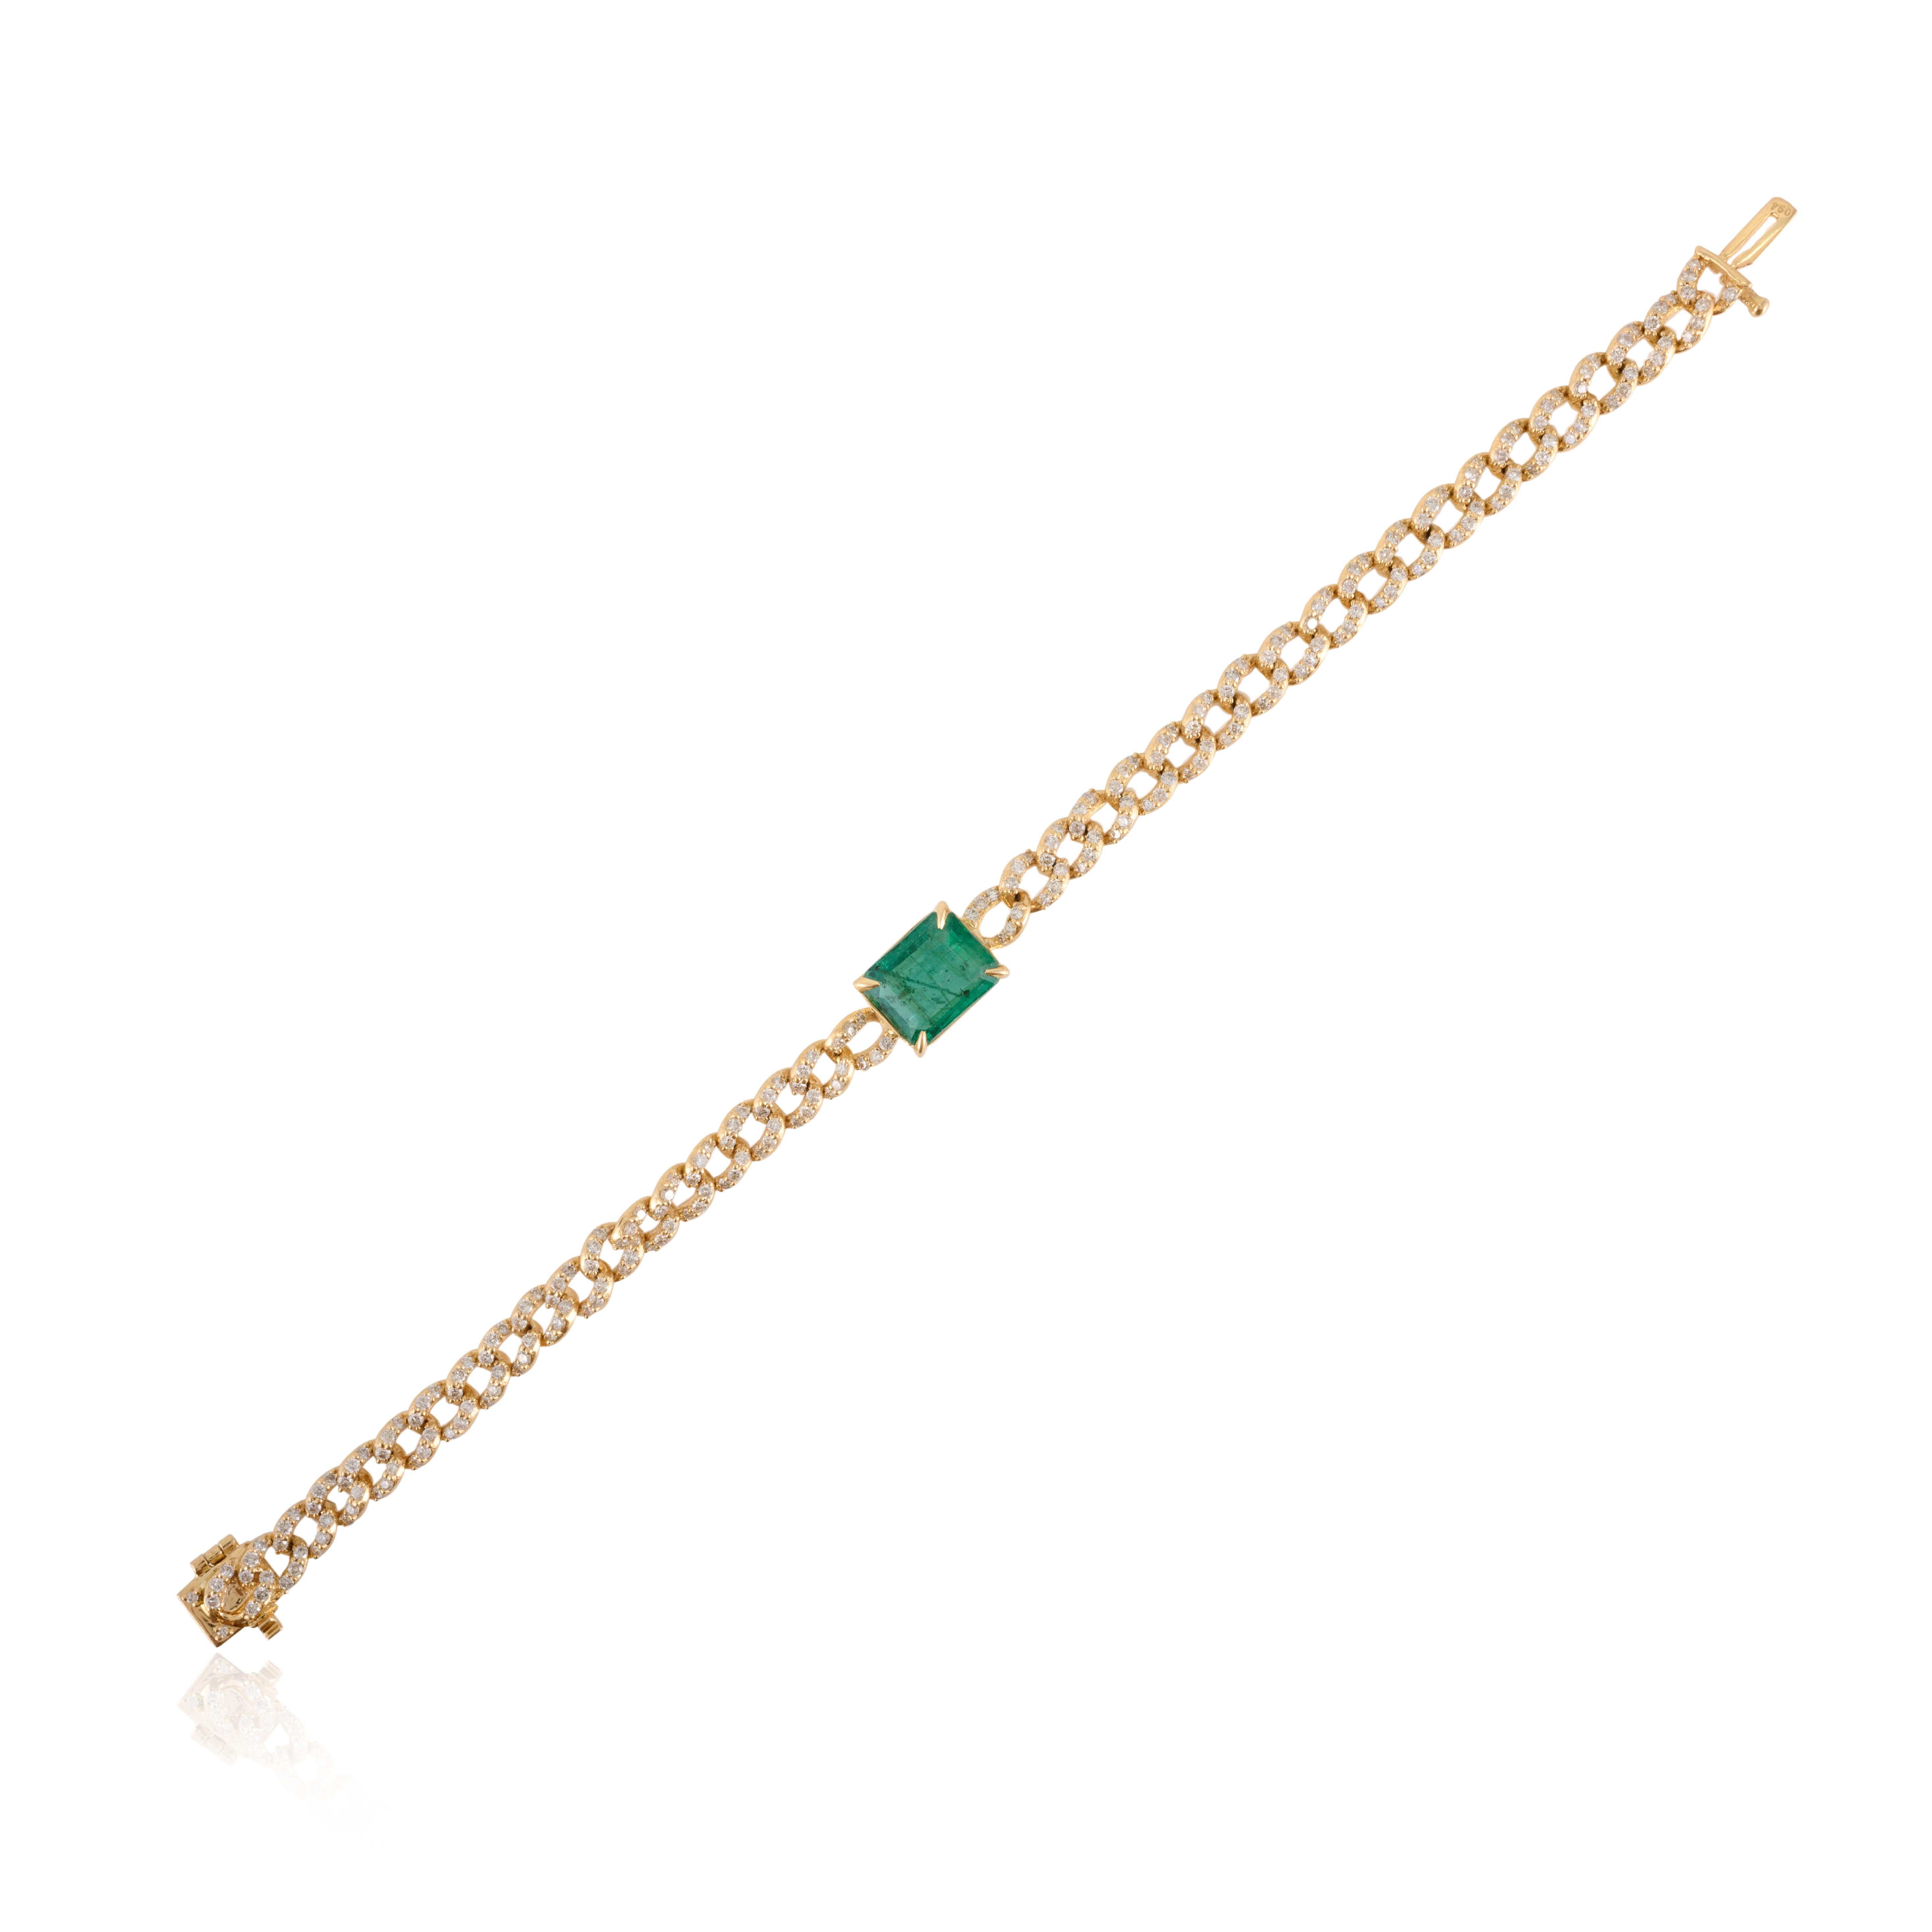 Art Deco Statement Emerald Diamond Chain Bracelet in 18k Solid Yellow Gold For Sale